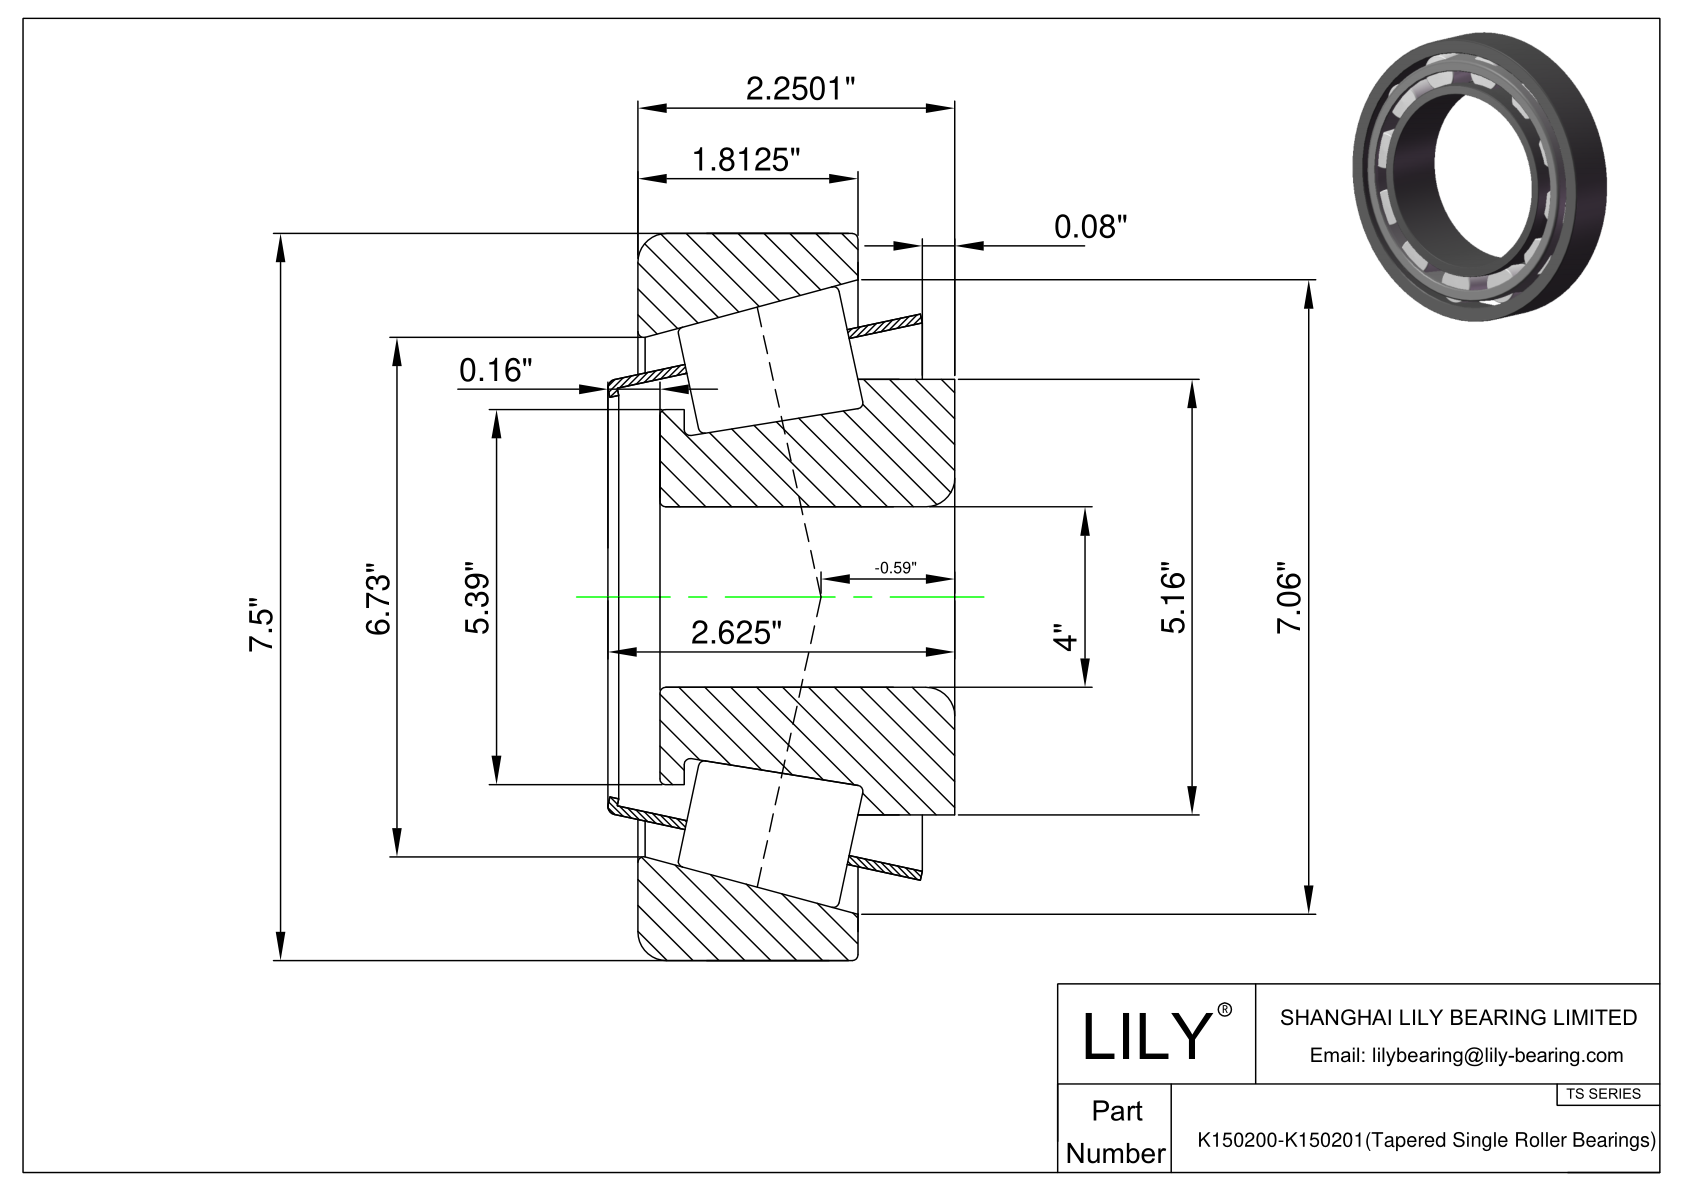 K150200-K150201 TS (Tapered Single Roller Bearings) (Imperial) cad drawing